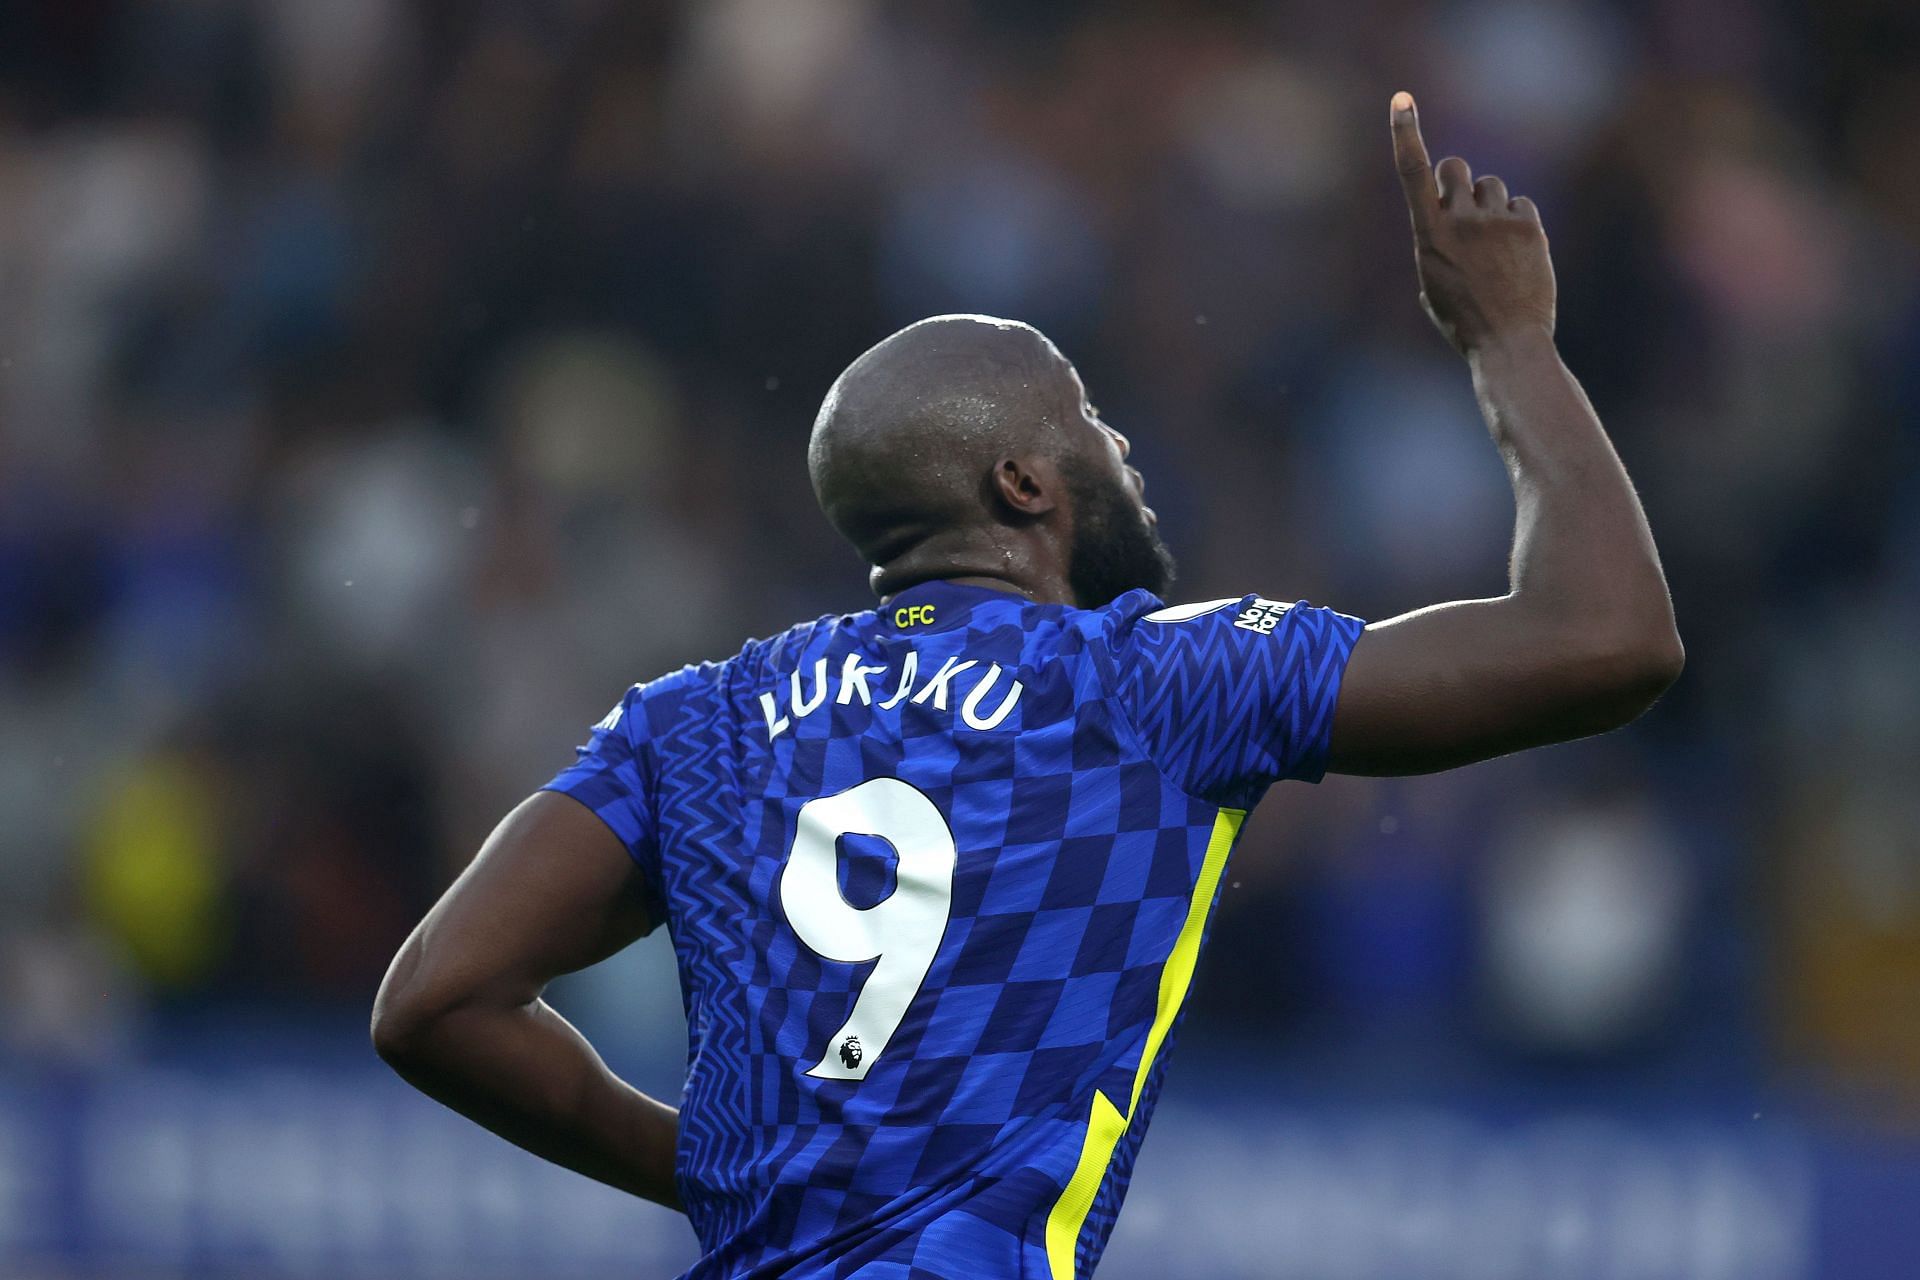 Lukaku will look to repeat his semi-final heroics in the FIFA Club World Cup final